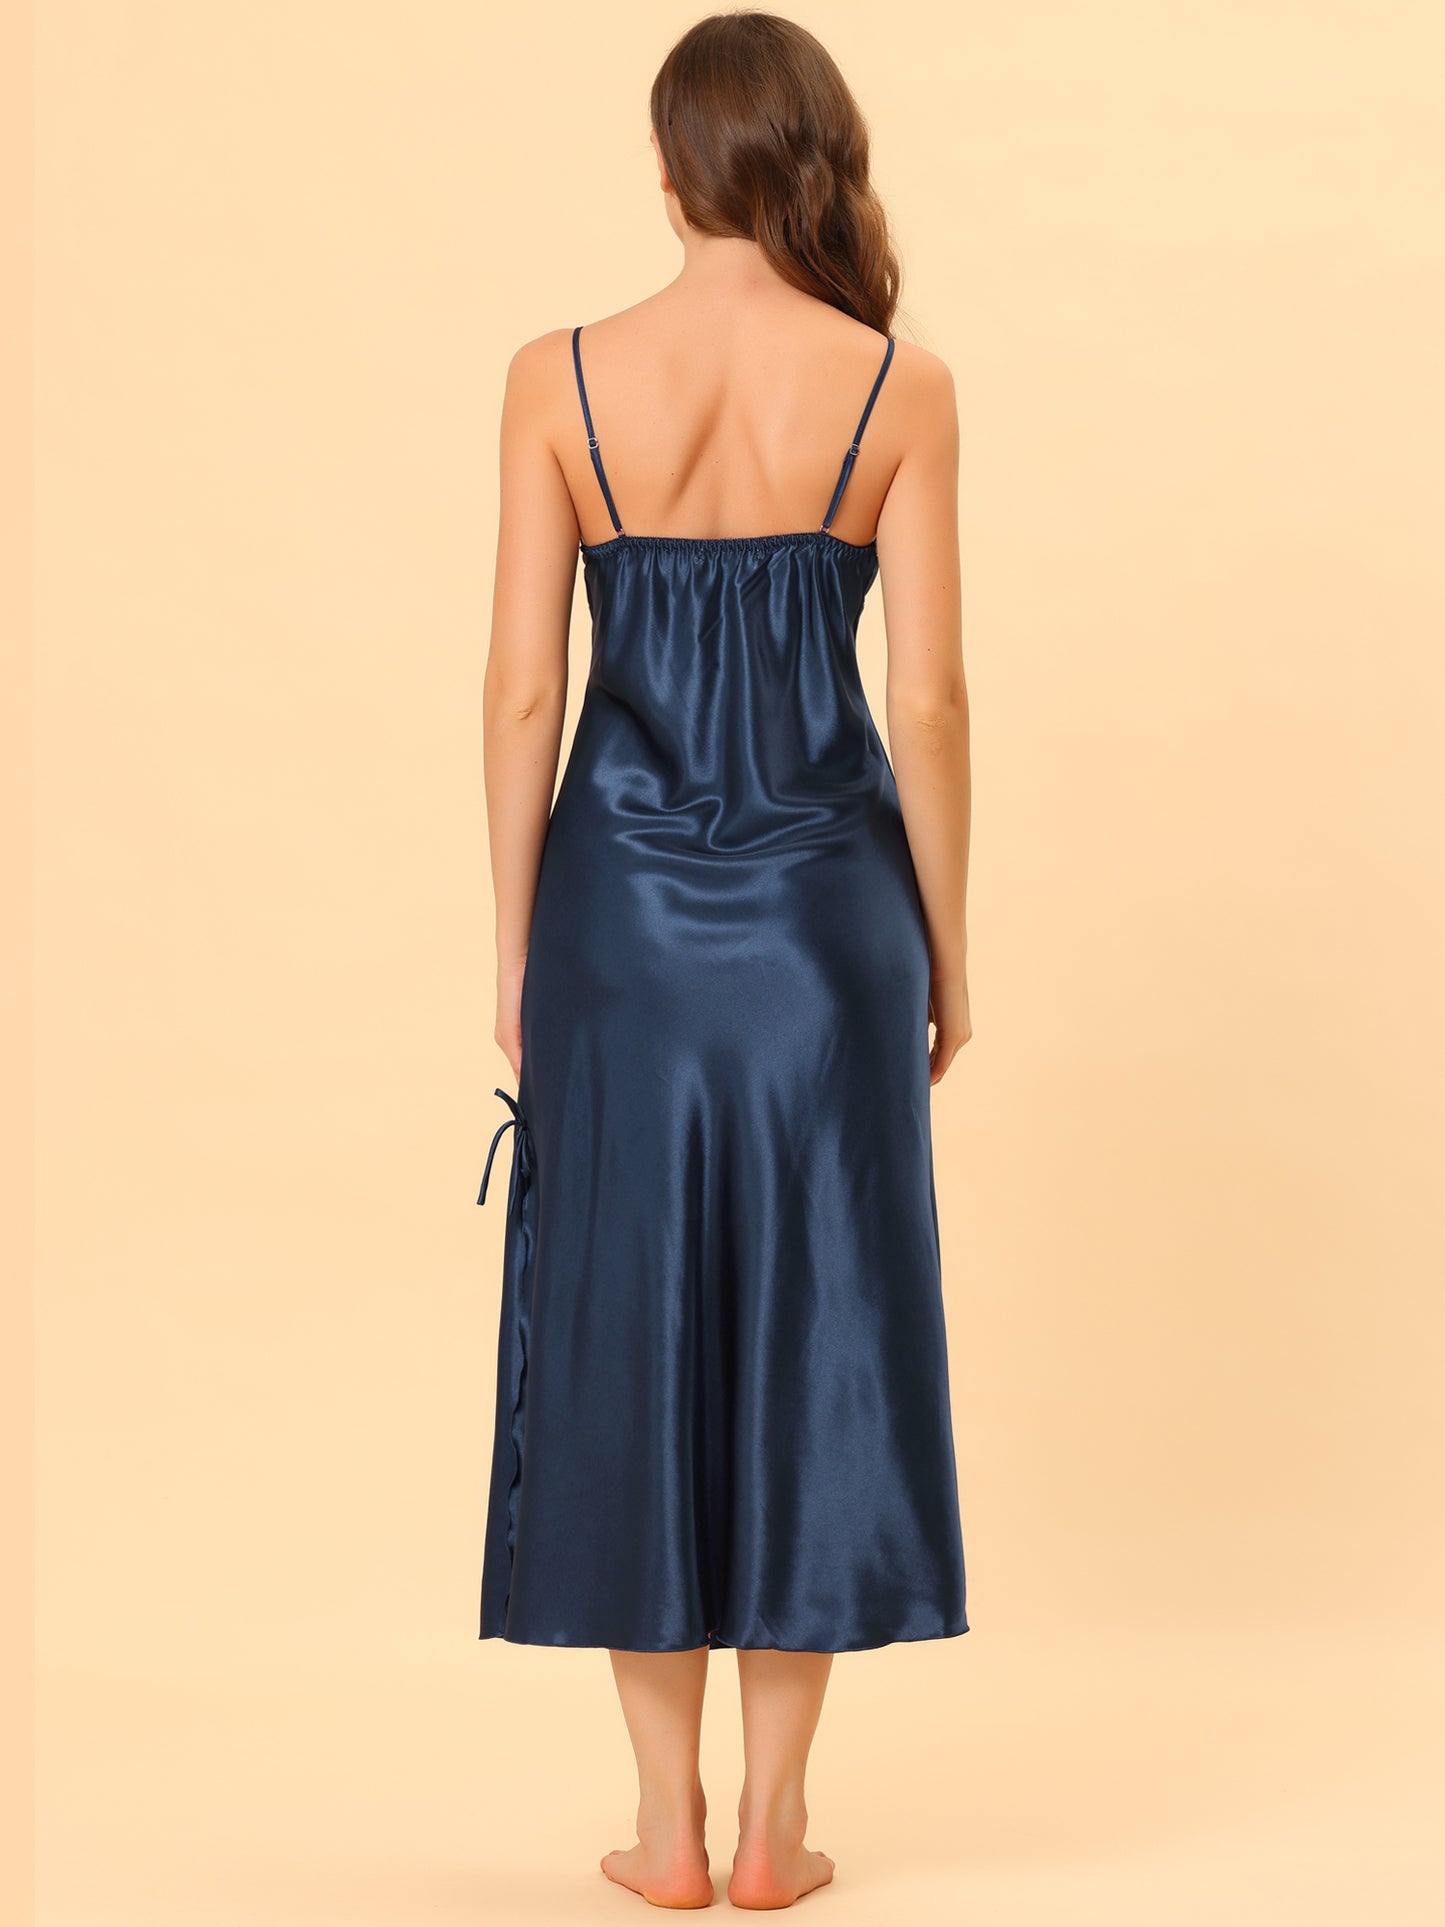 cheibear Satin Slip Dress Chemise Silky Lounge Camisole Maxi Nightgowns Blue